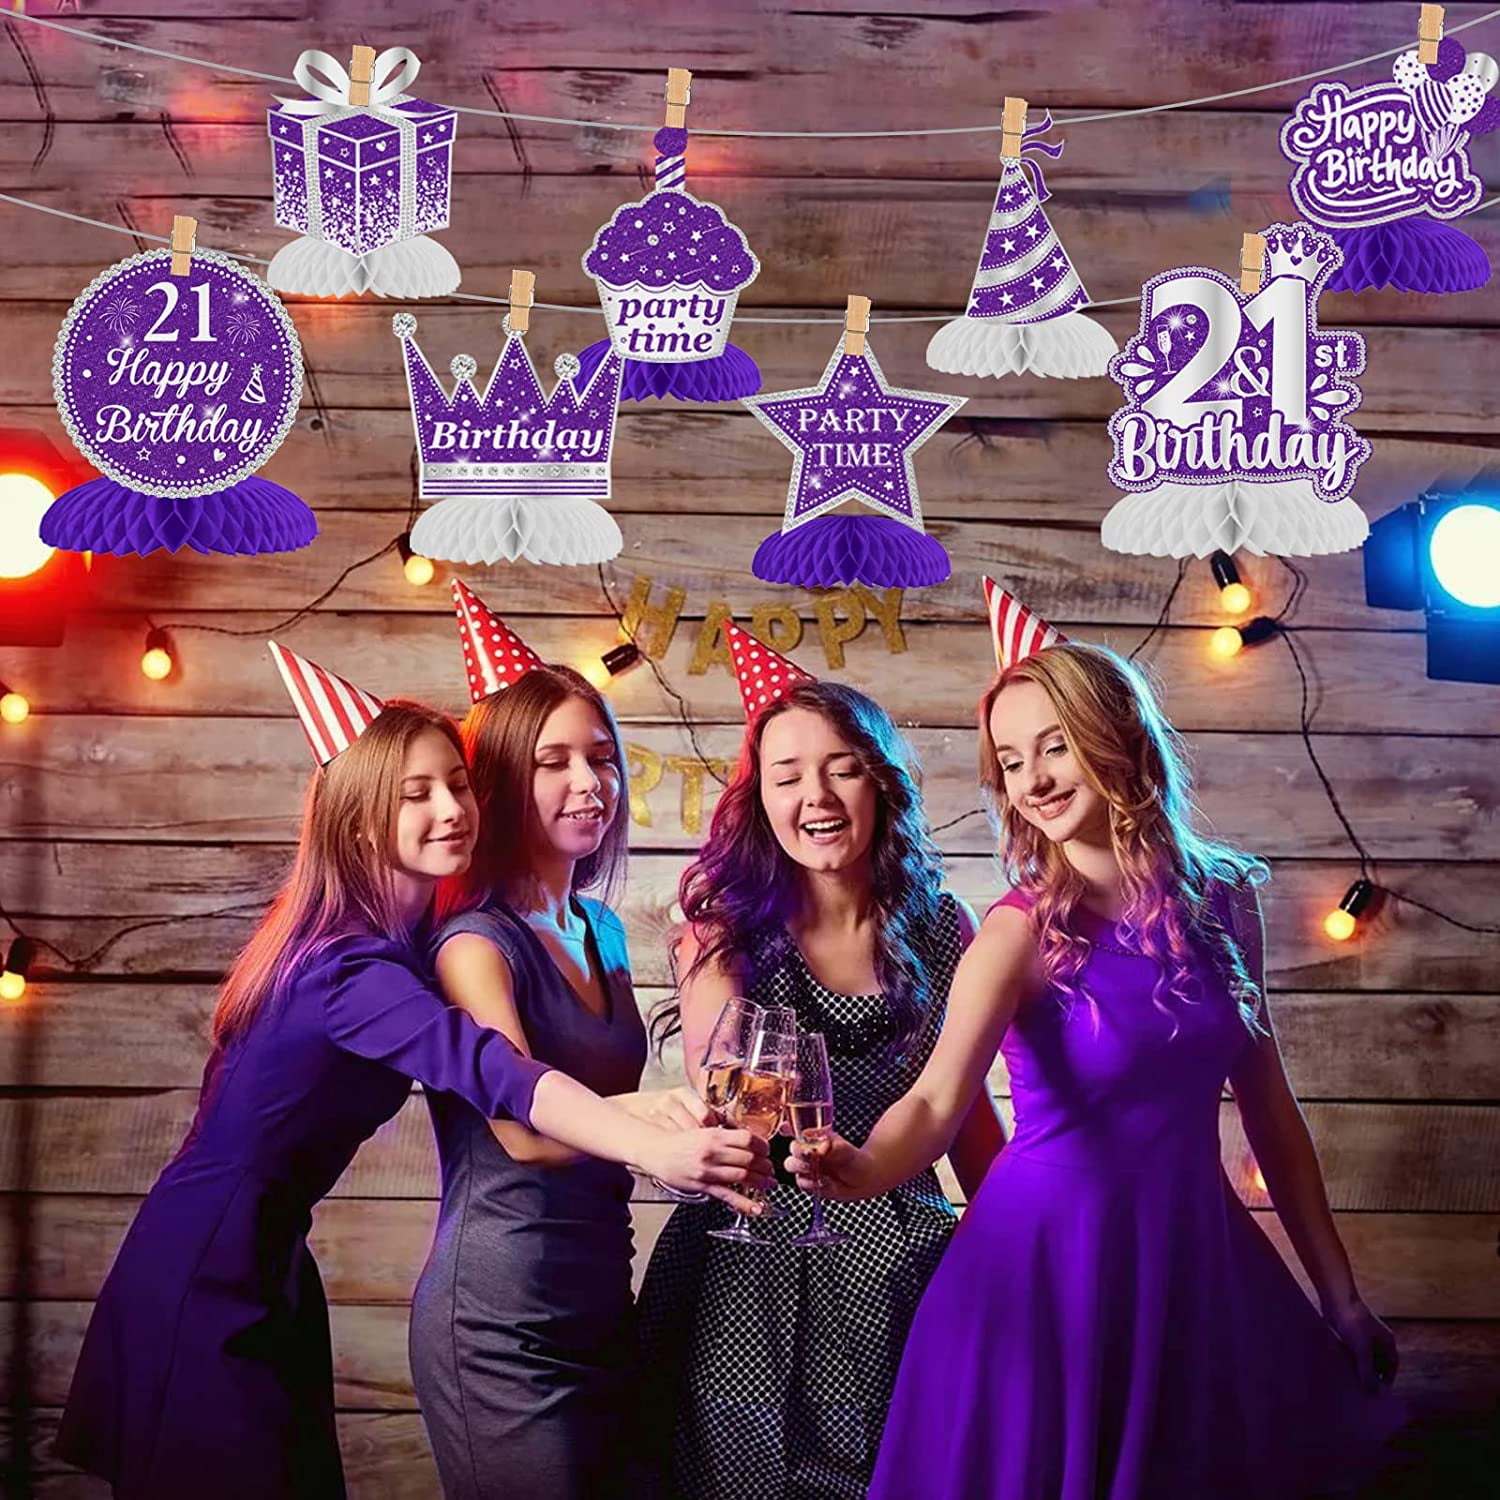  Nelbiirth Happy 21st Birthday Party Decorations Set,21st Birthday  Purple Swirls Streamers with Purple Table Ballon Stand Kit,Perfect for 21st  Bday Party Decorations. : Home & Kitchen